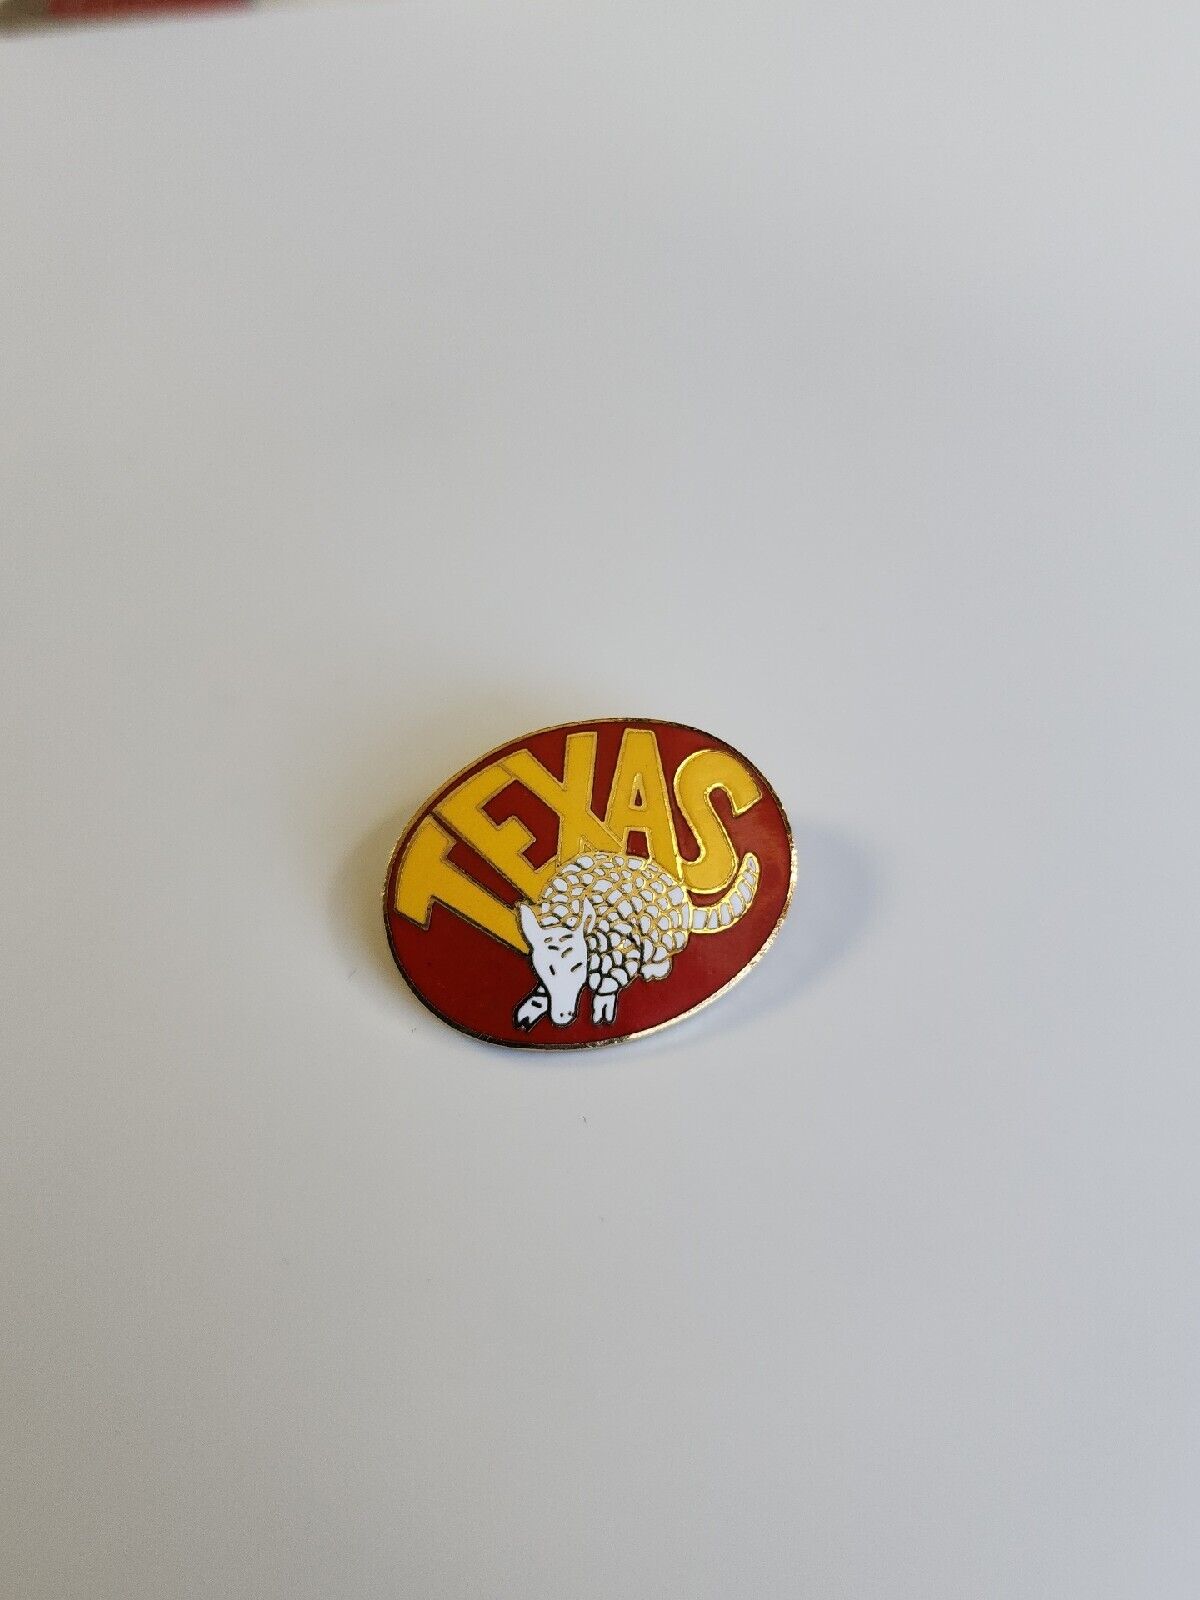 State of Texas Travel Souvenir Lapel Pin Armadillo Red Yellow & White Colors